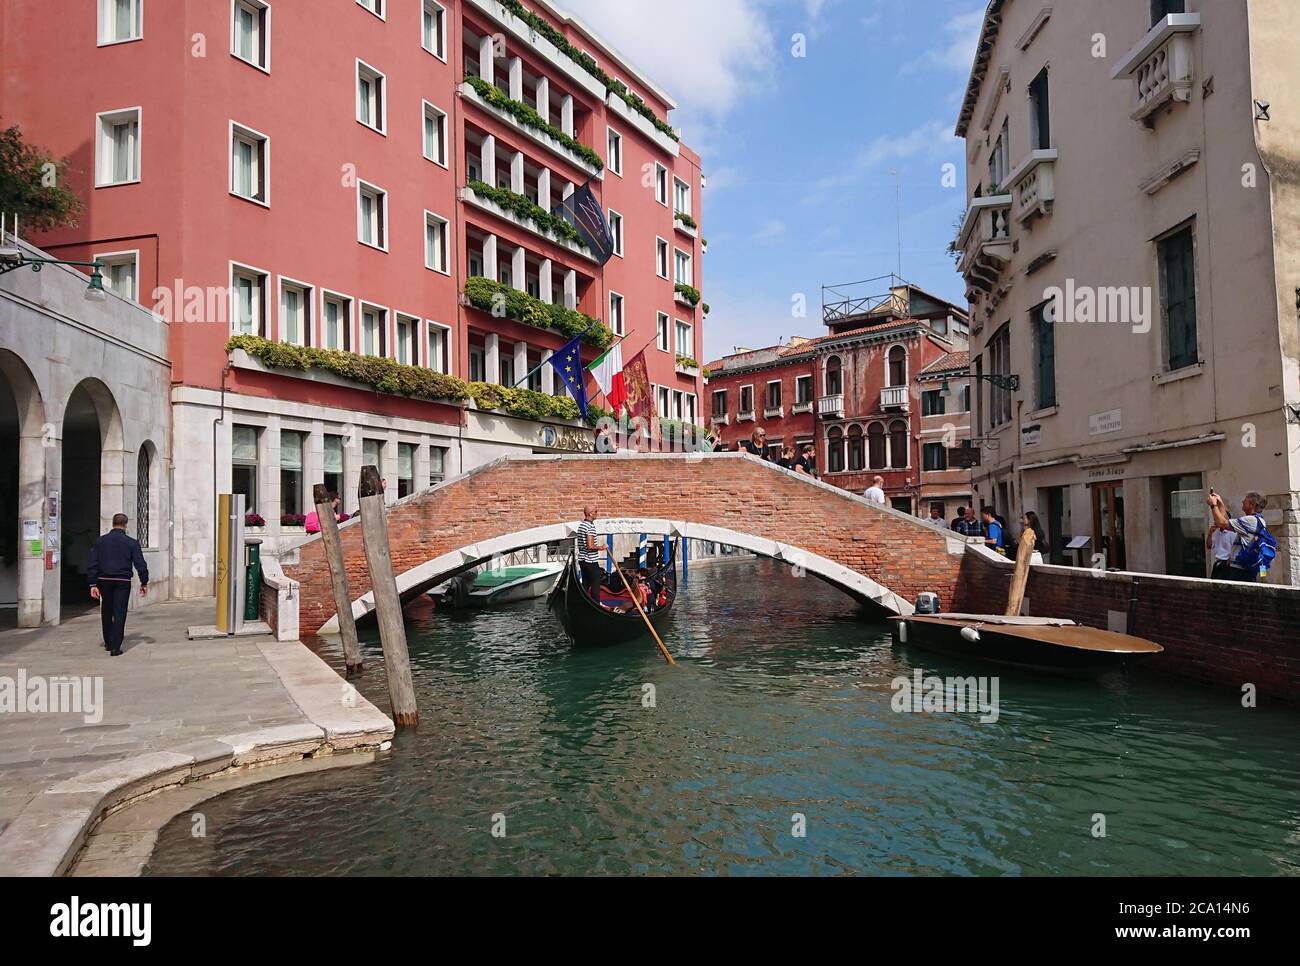 Oct. 1, 2019 - Venice, Italy: General views to the Venice with its lagoons, bridges, gondolas and street life. Stock Photo